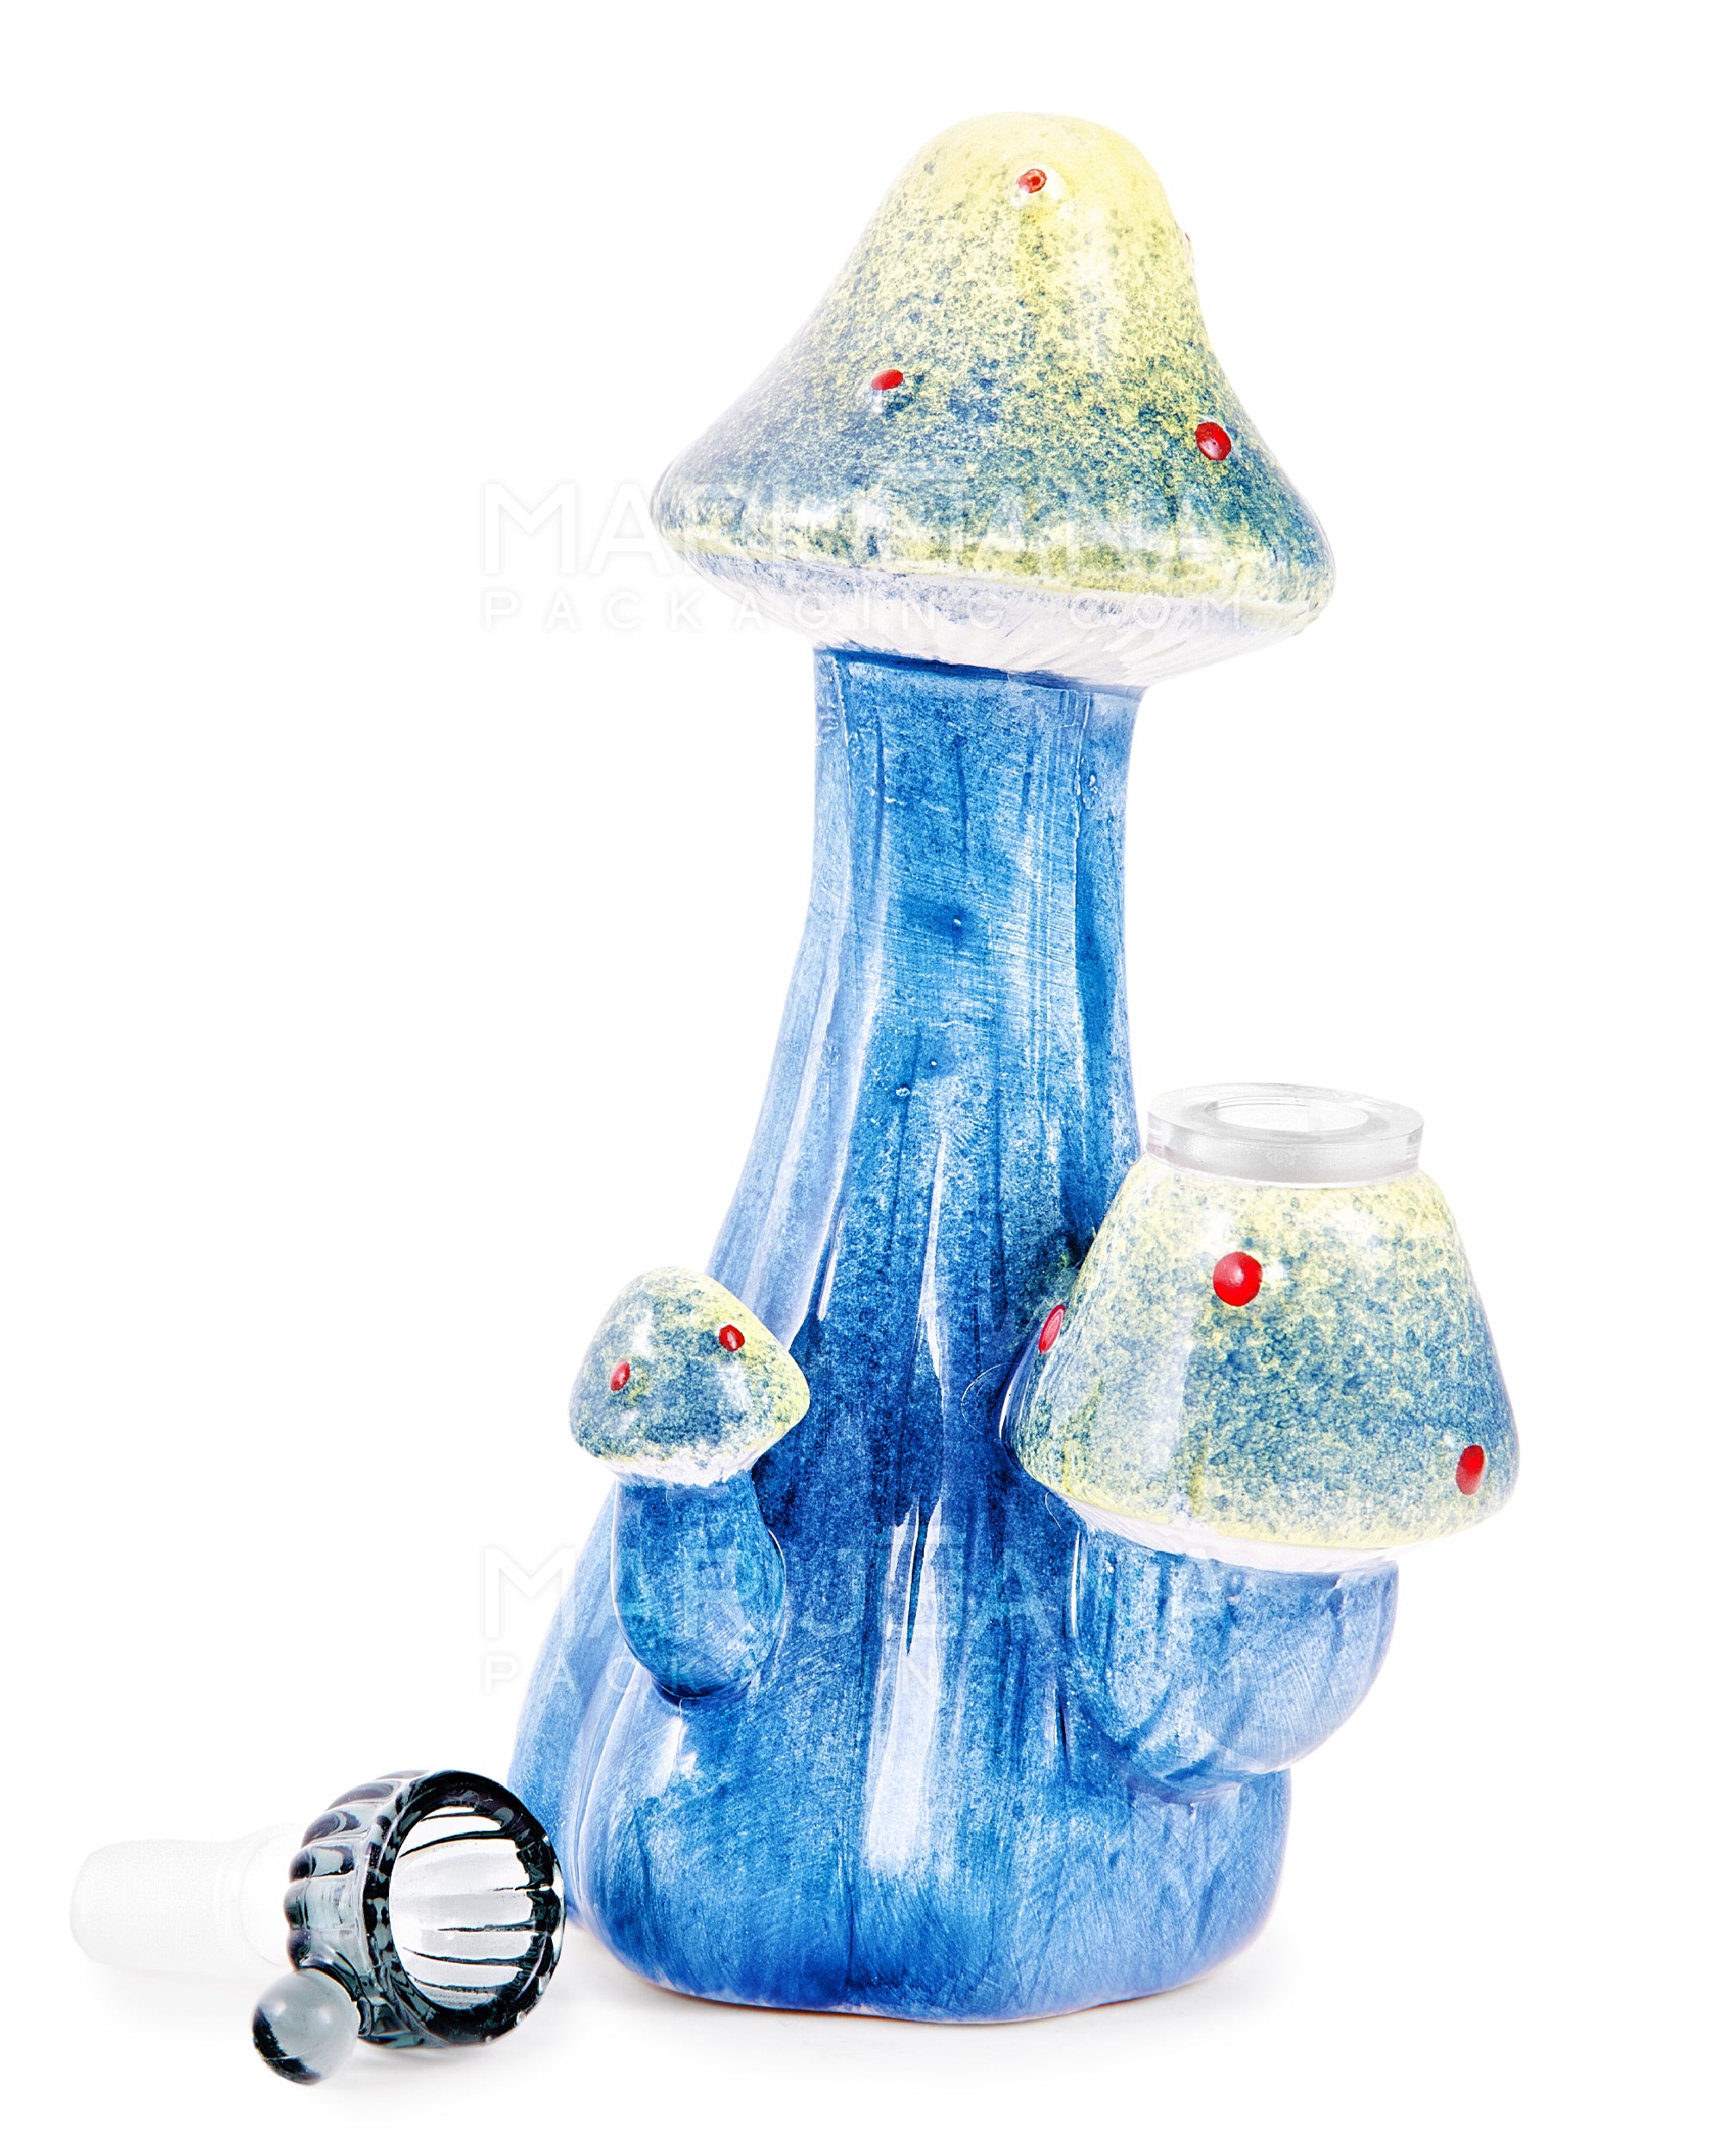 Mushroom Painted Ceramic Pipe | 7in Tall - Glass Bowl - Mixed - 2